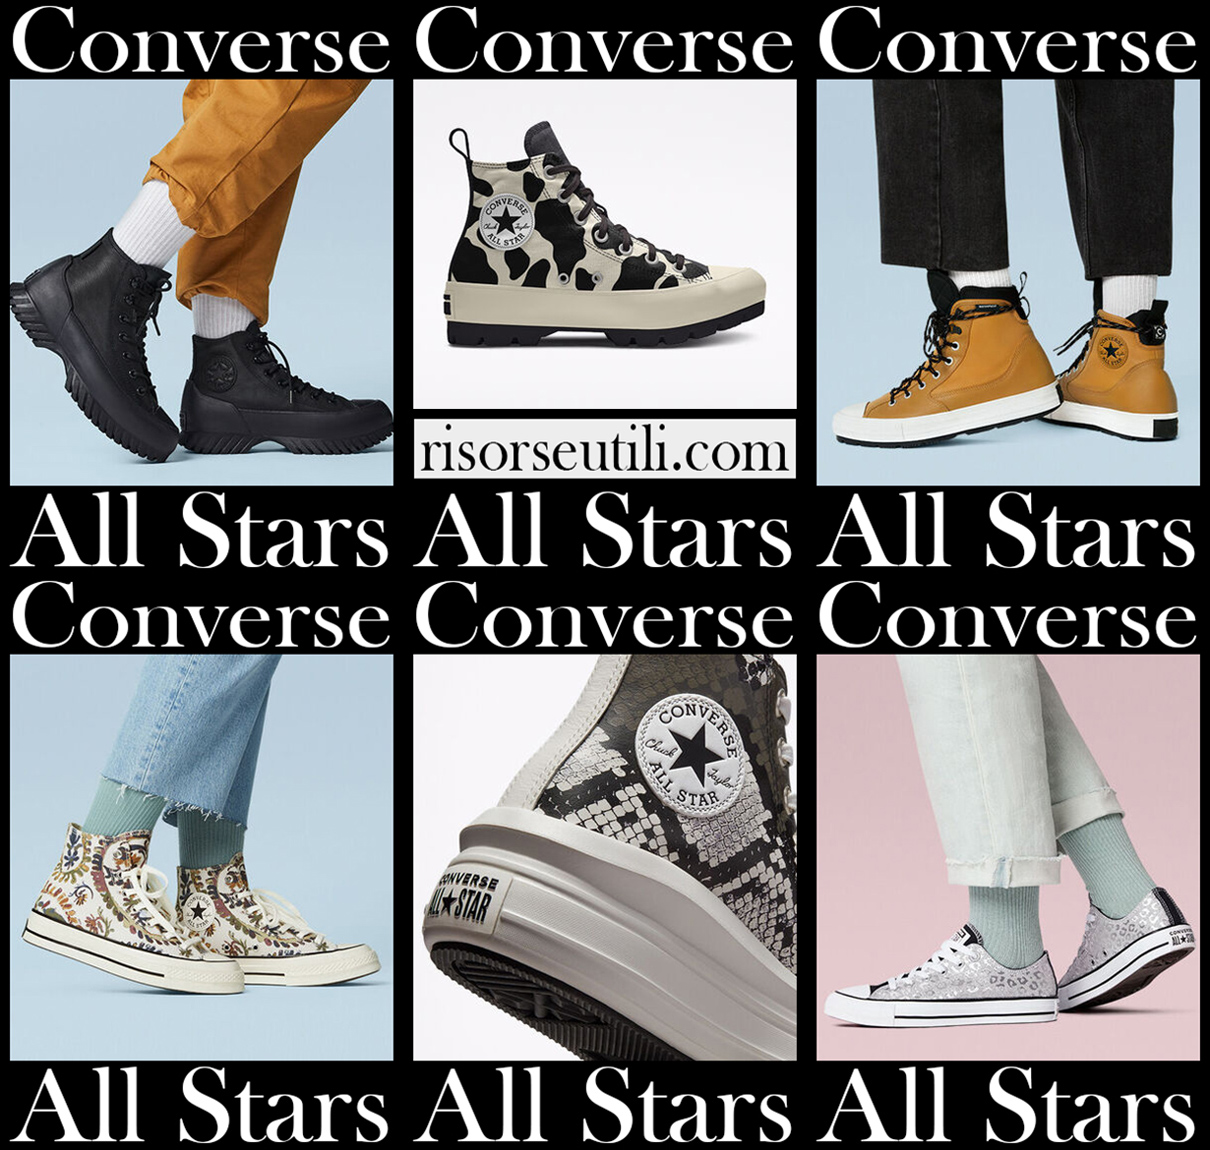 New arrivals Converse sneakers 2022 women's All Stars